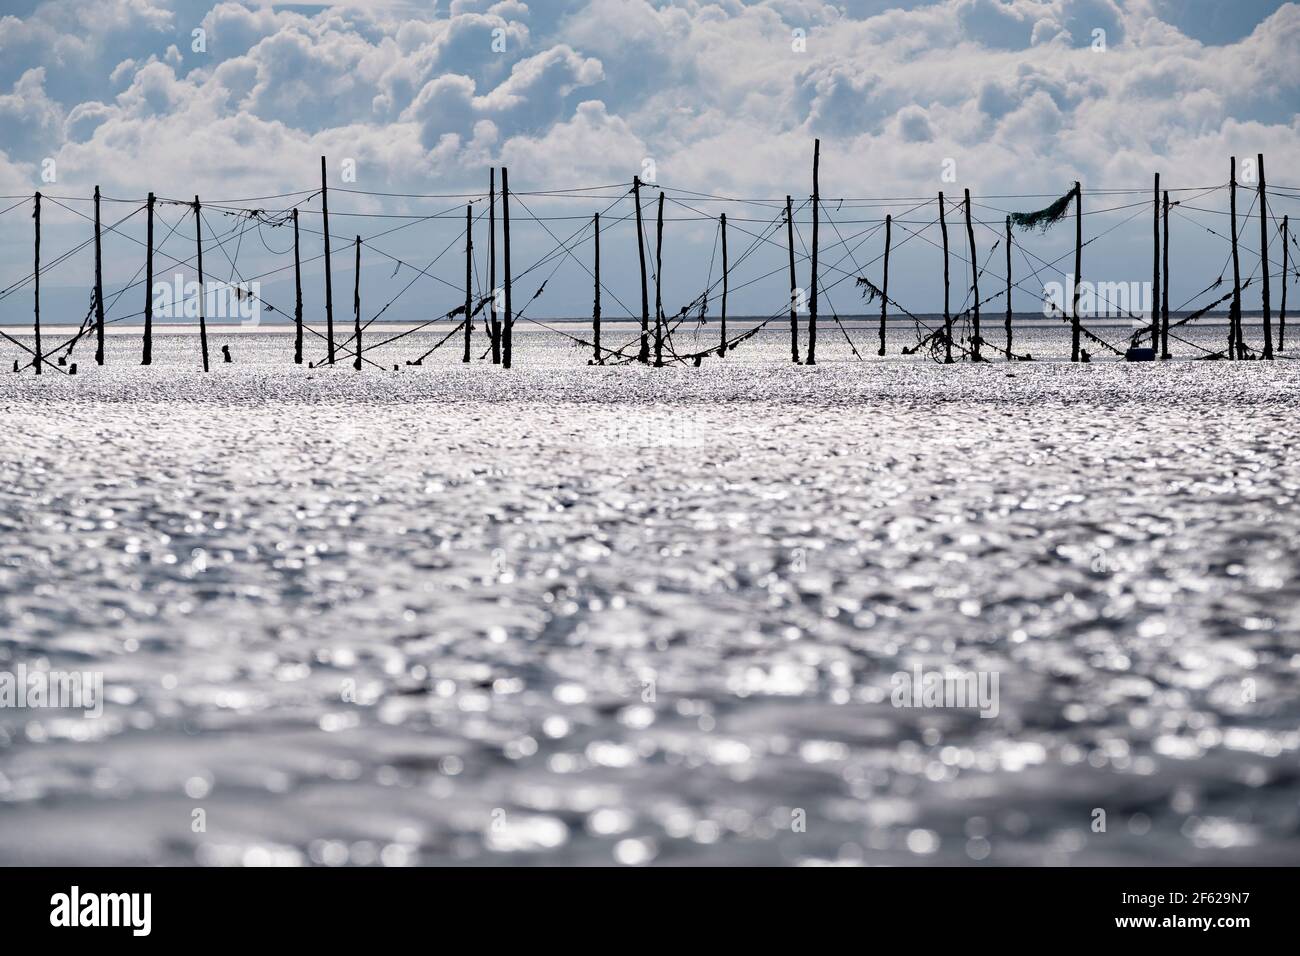 A wooden network of poles holding fishing nets in the Solway Firth at low tide, Dumfries and Galloway, Scotland. Stock Photo